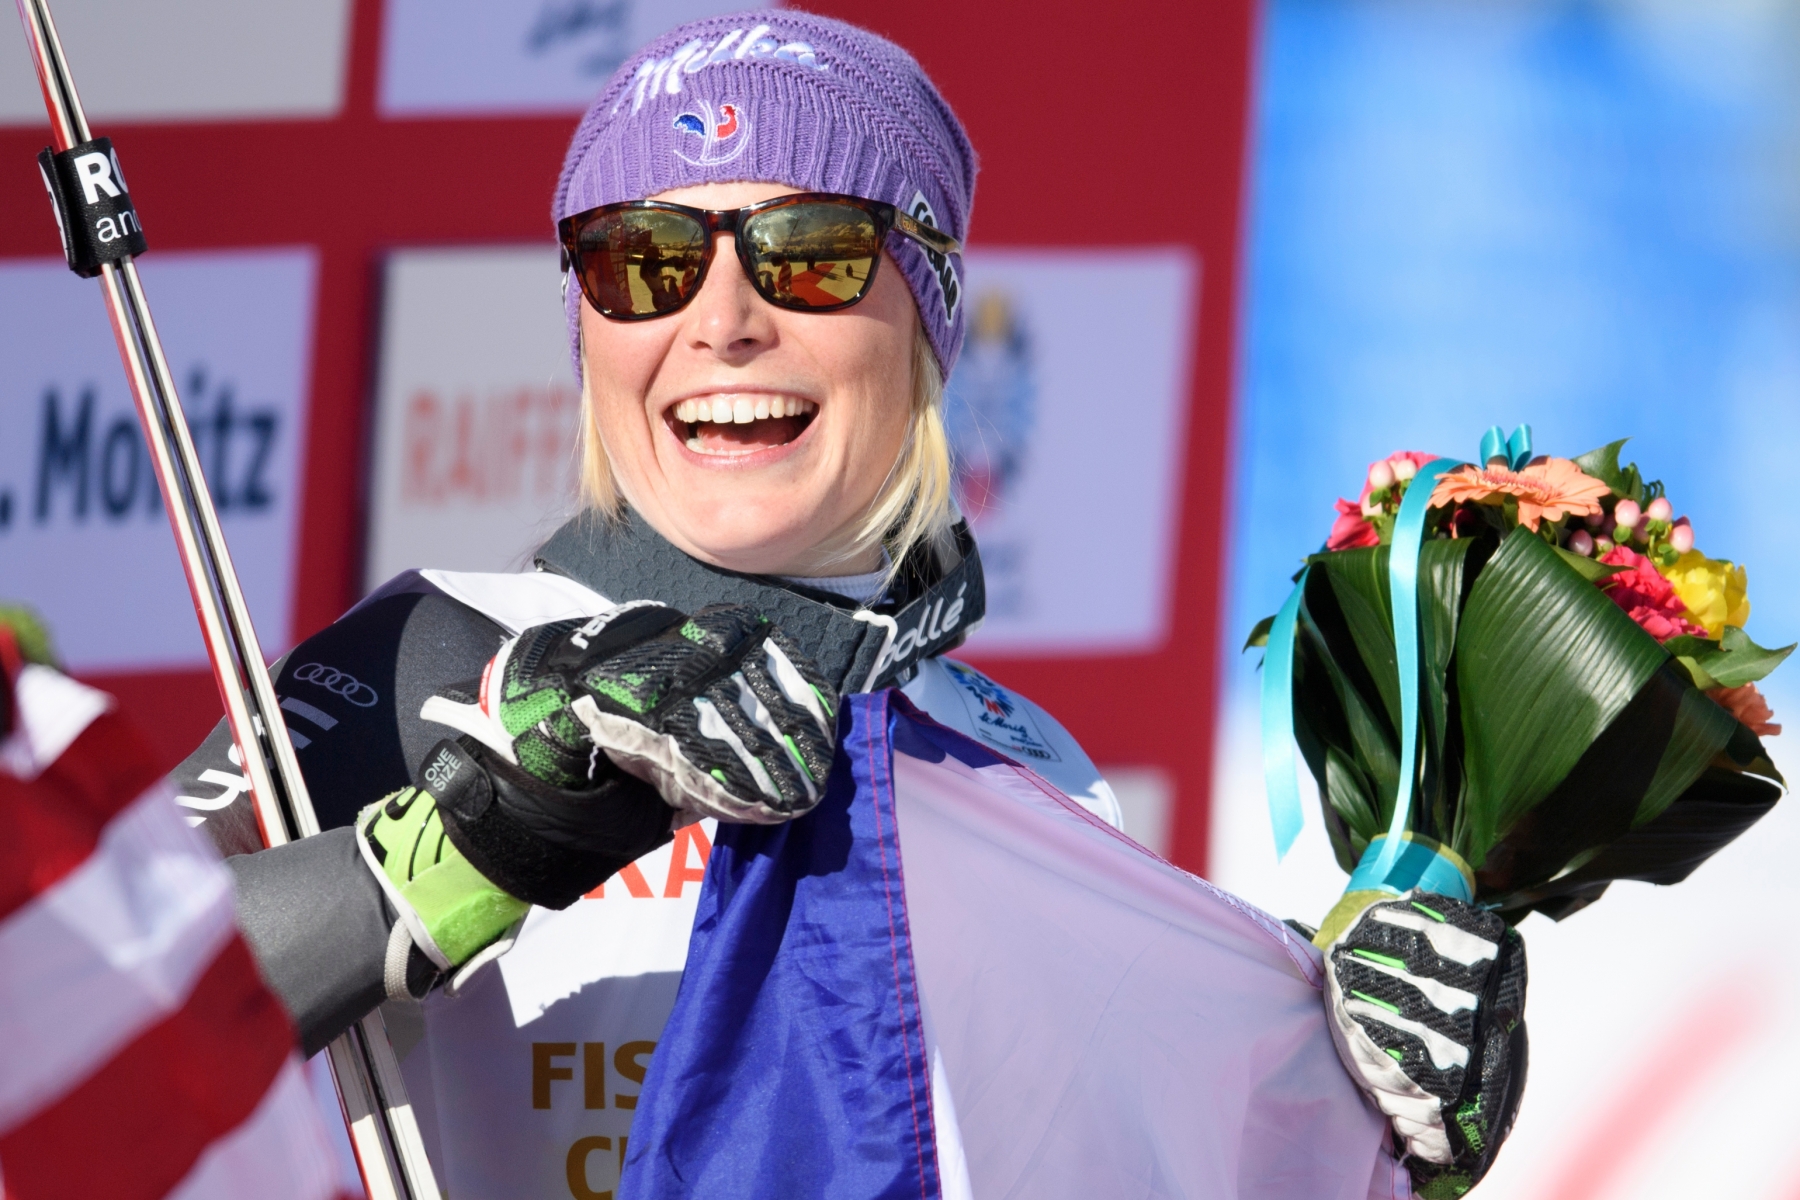 Gold medalist Tessa Worley of France reacts during the flower ceremony of the women‿s Giant Slalom at the 2017 FIS Alpine Skiing World Championships in St. Moritz, Switzerland, Thursday, February 16, 2017. (KEYSTONE/Gian Ehrenzeller) SWITZERLAND ALPINE SKIING WORLDS WOMEN GIANT SLALOM